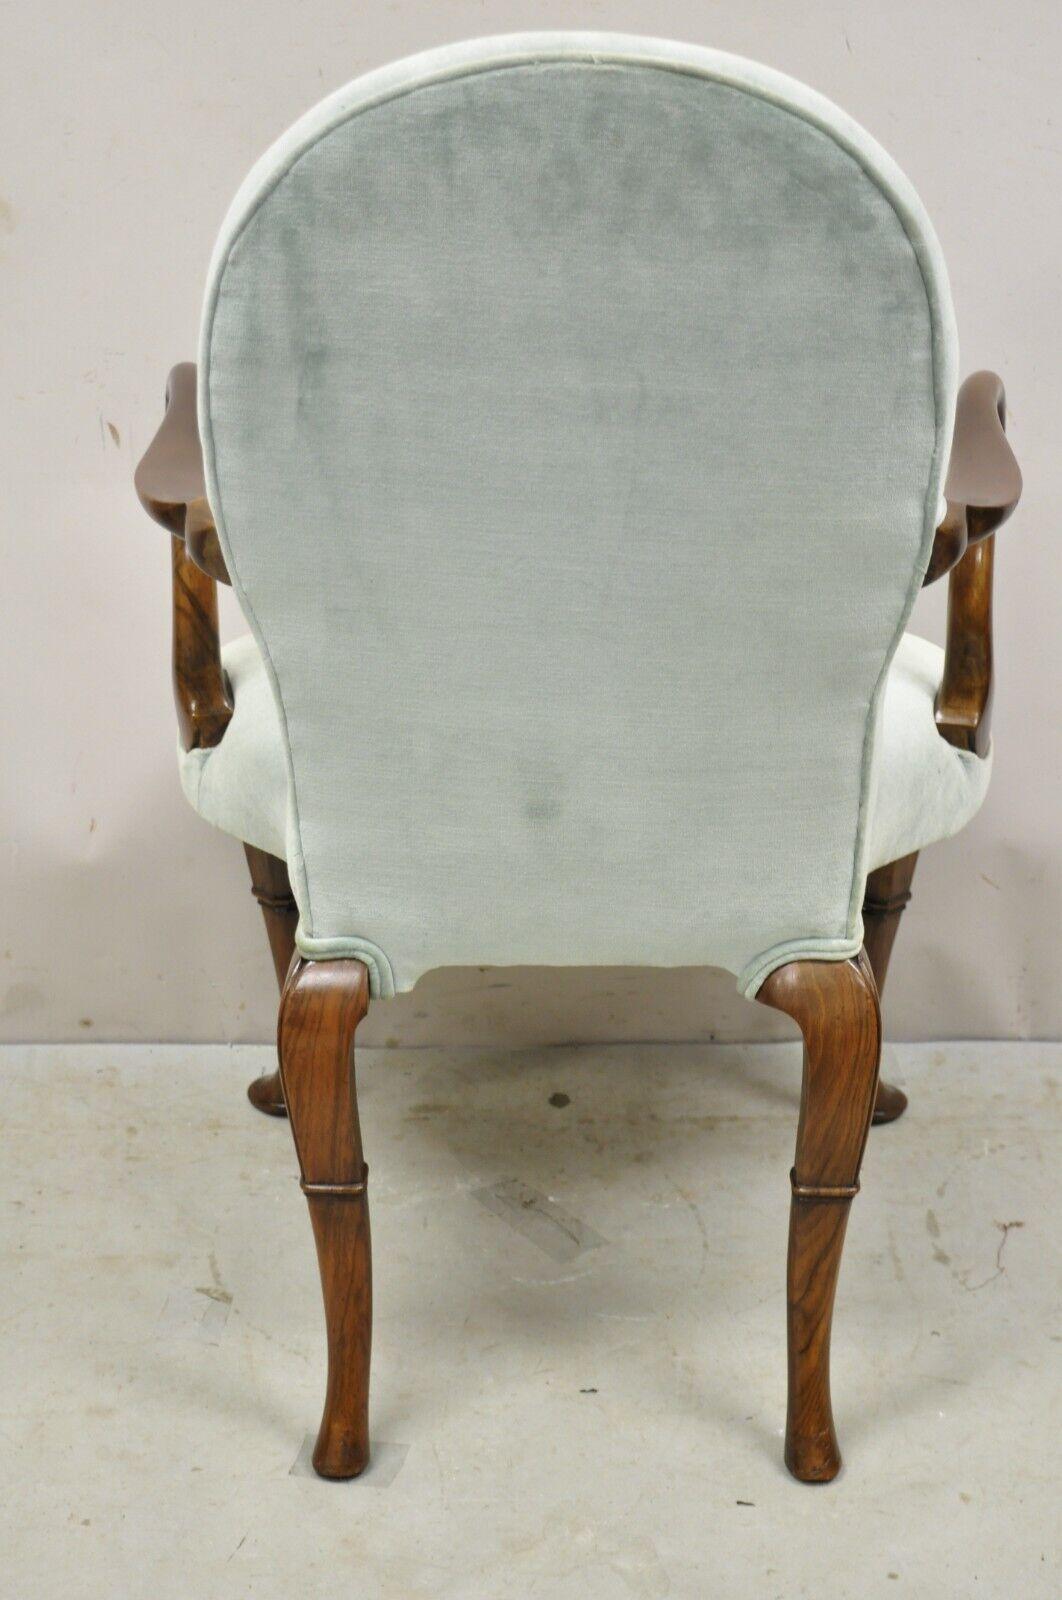 Vintage English Queen Anne Style Mahogany & Walnut Gooseneck Blue Arm Chair For Sale 4